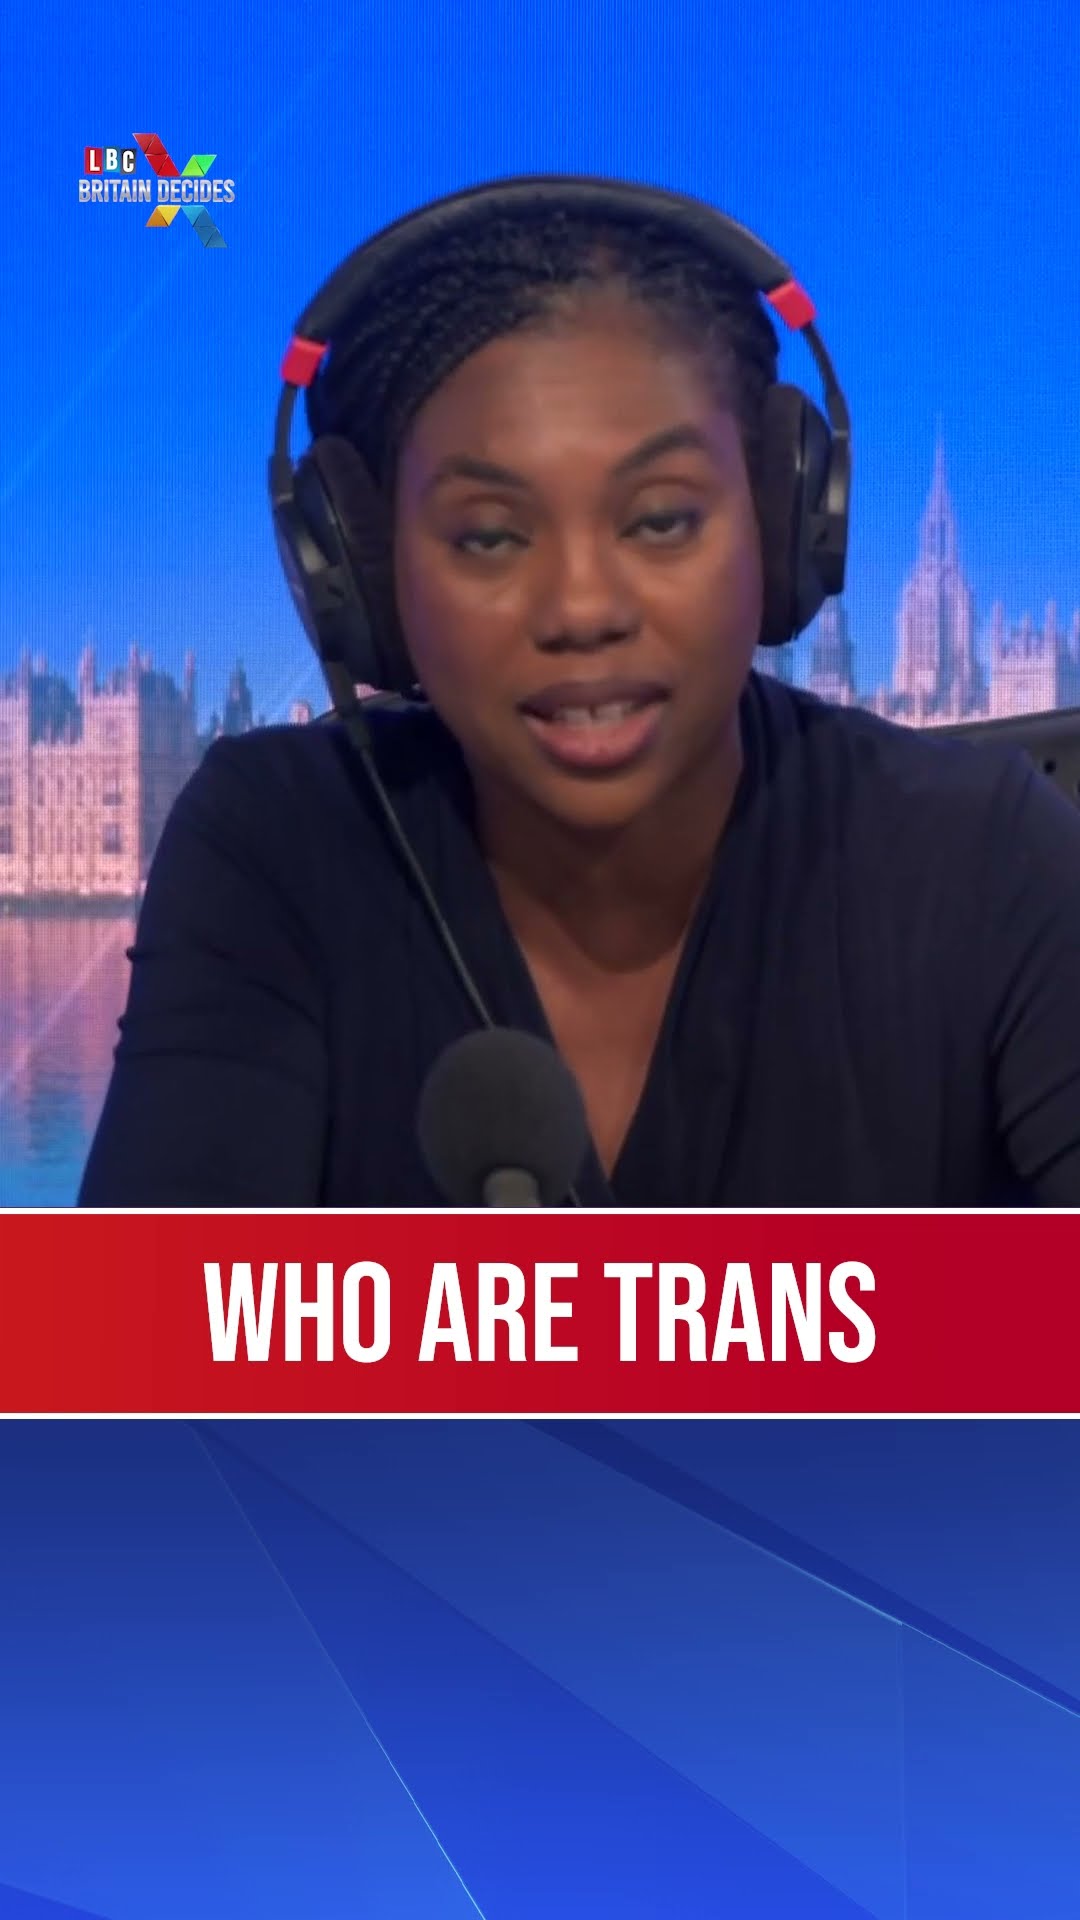 'Changing your clothes doesn't change who you are,' says Kemi Badenoch LBC